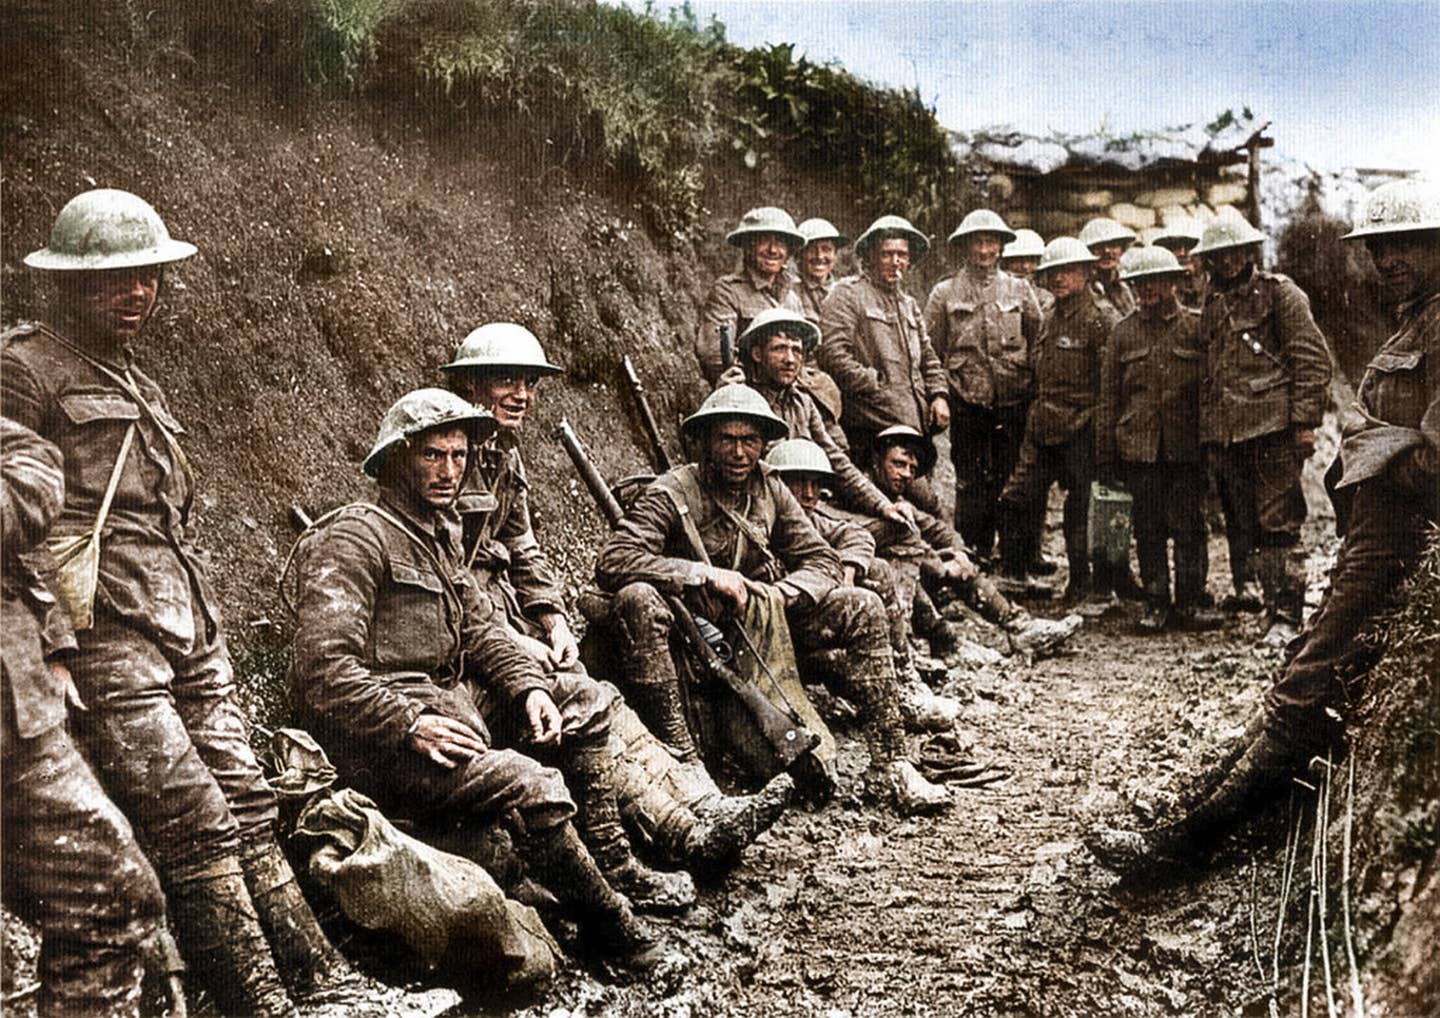 royal irish rifles at Battle of the Somme